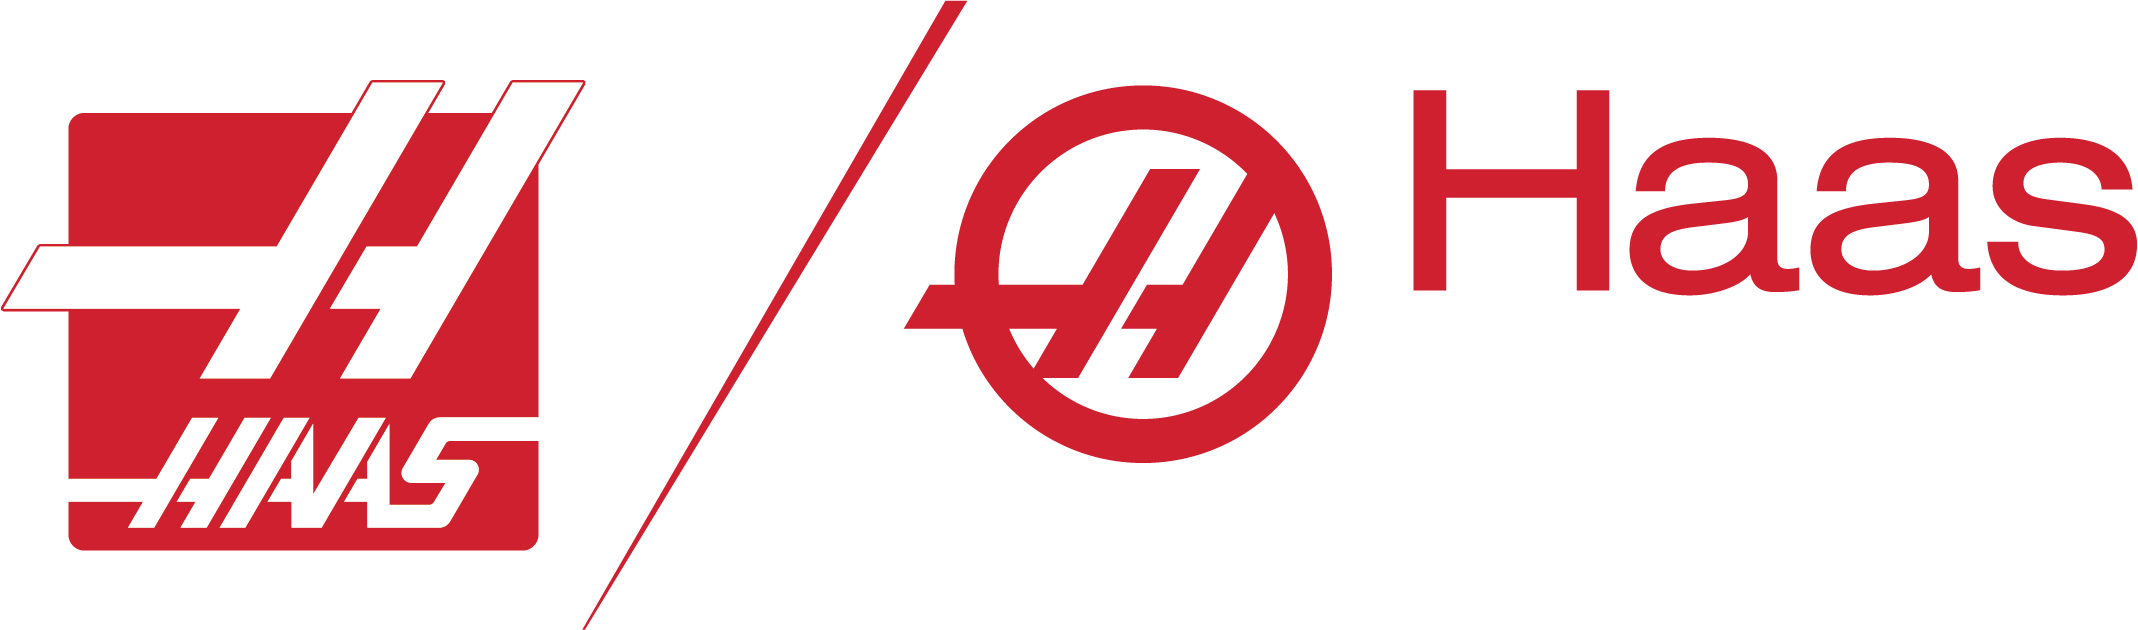 Haas f1 Logo White.png